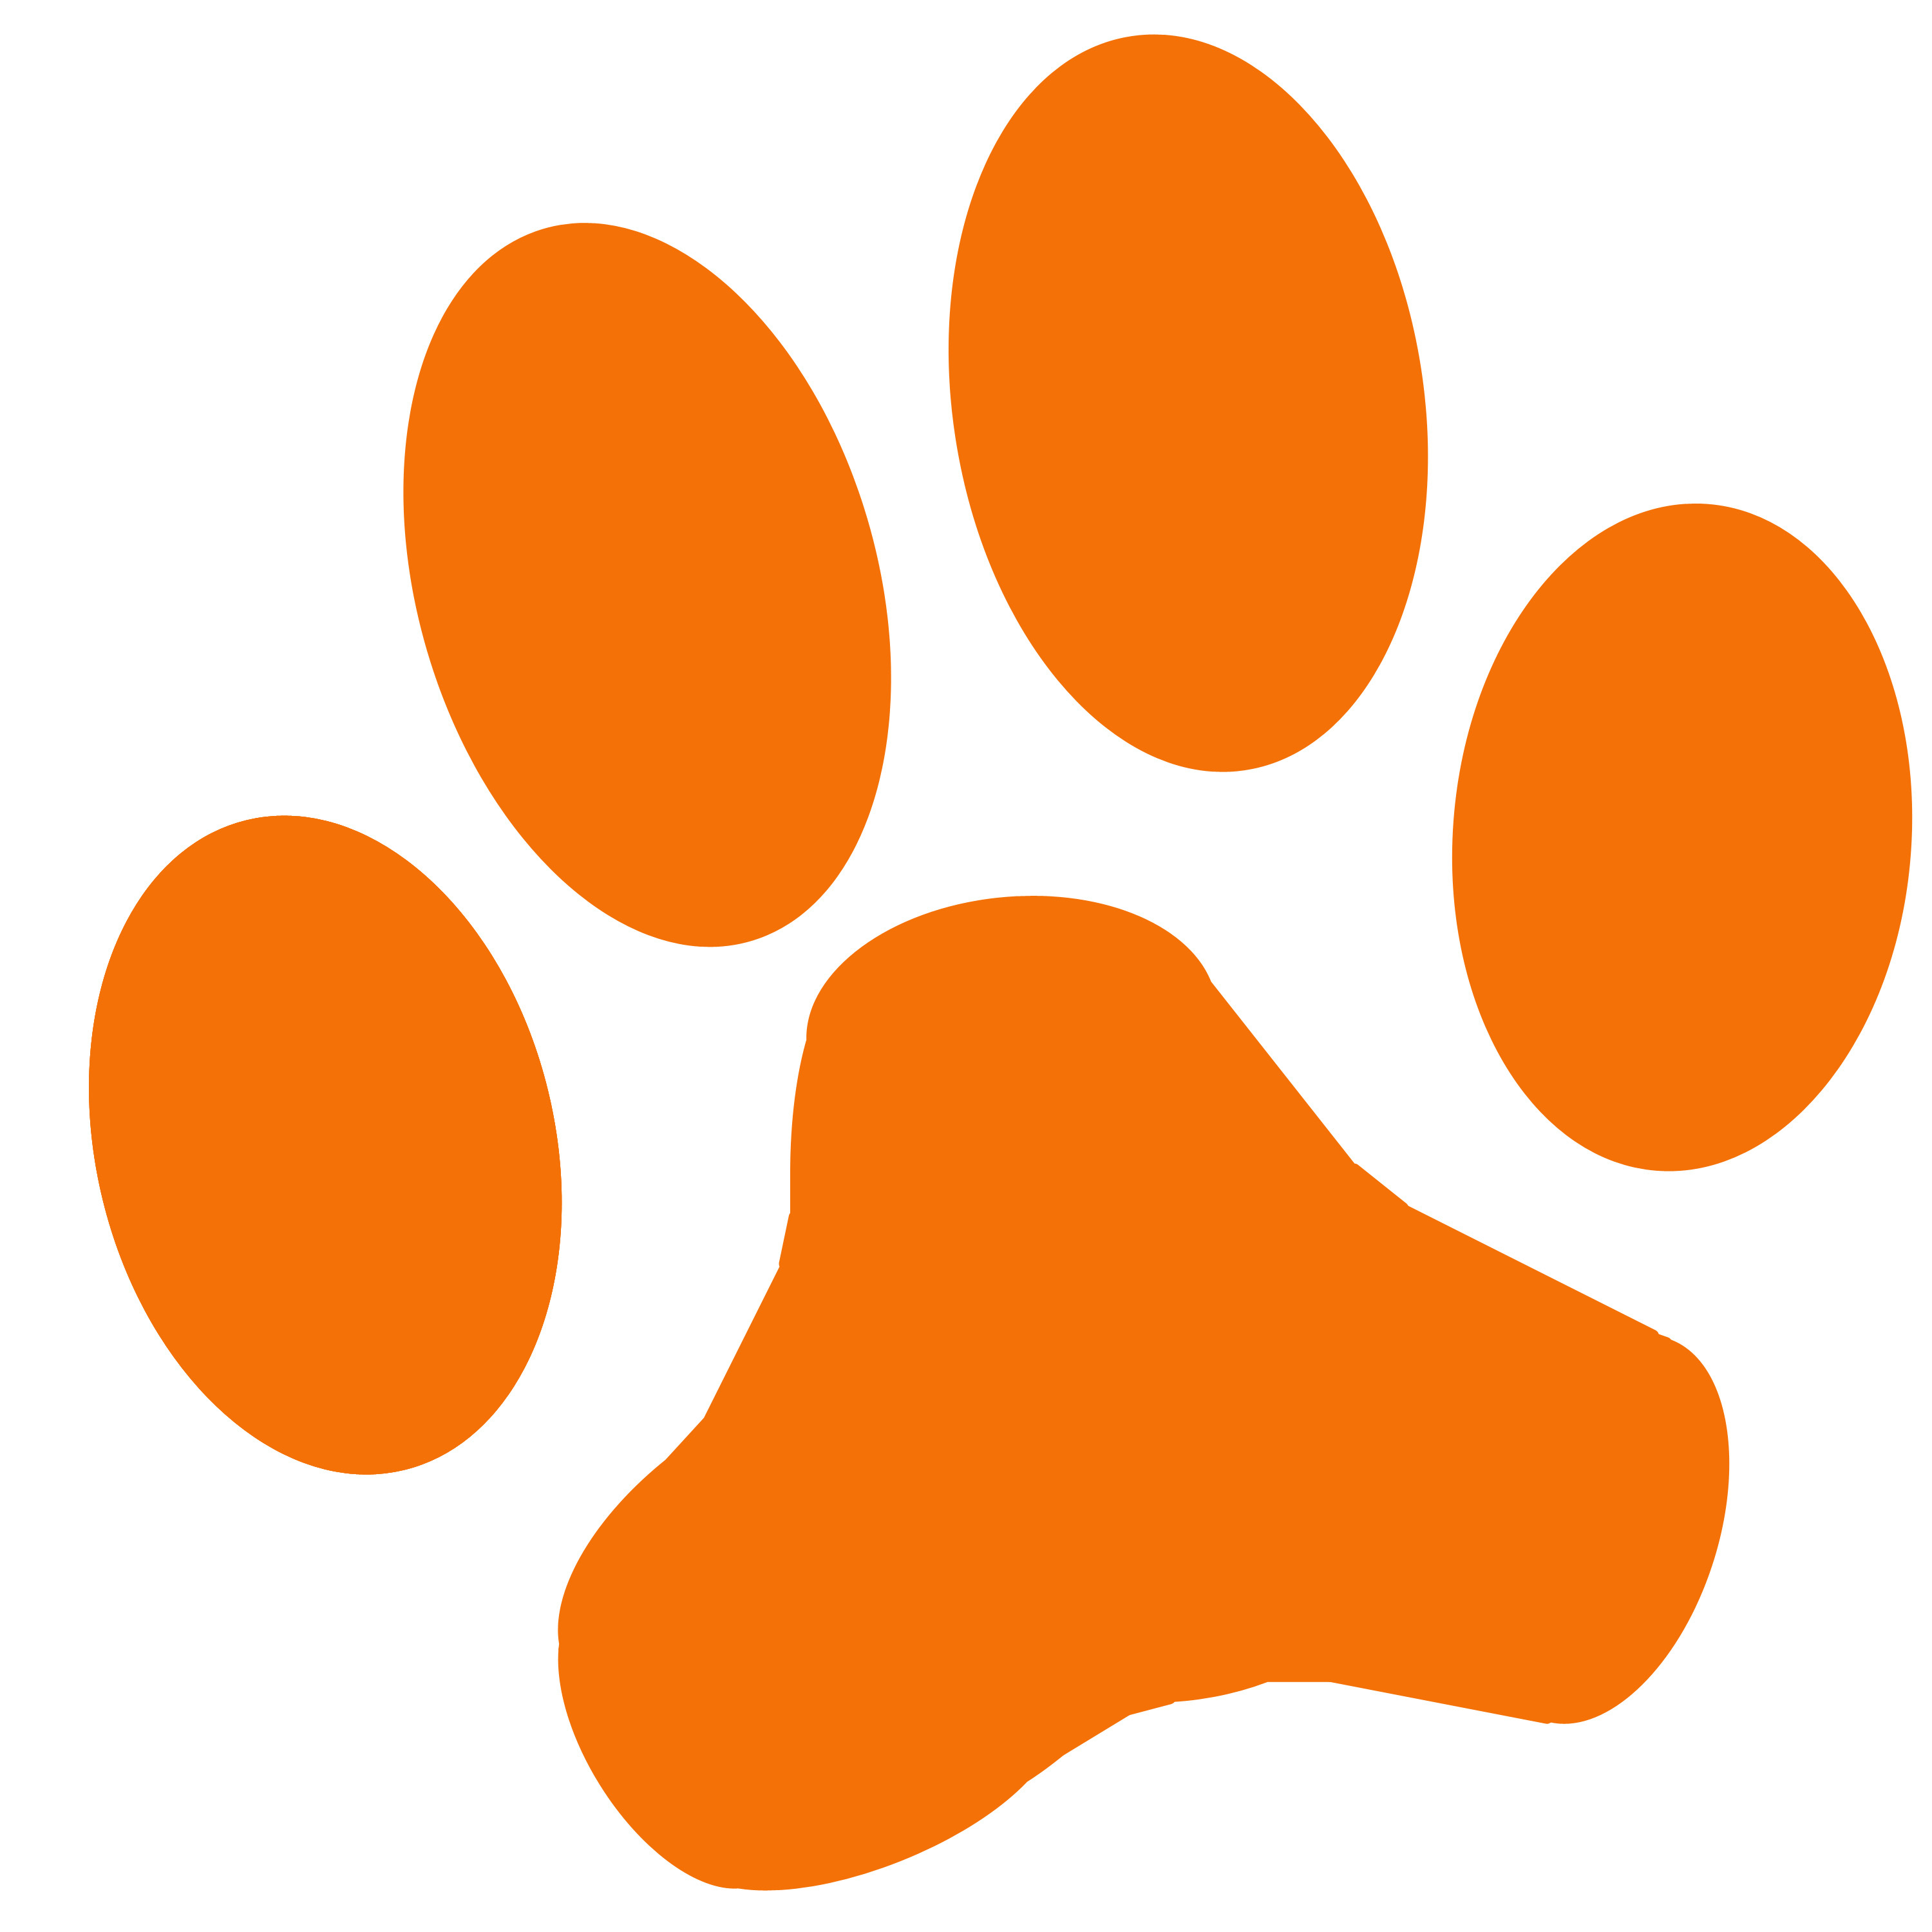 Free Dog Paw Vector, Download Free Dog Paw Vector png images, Free